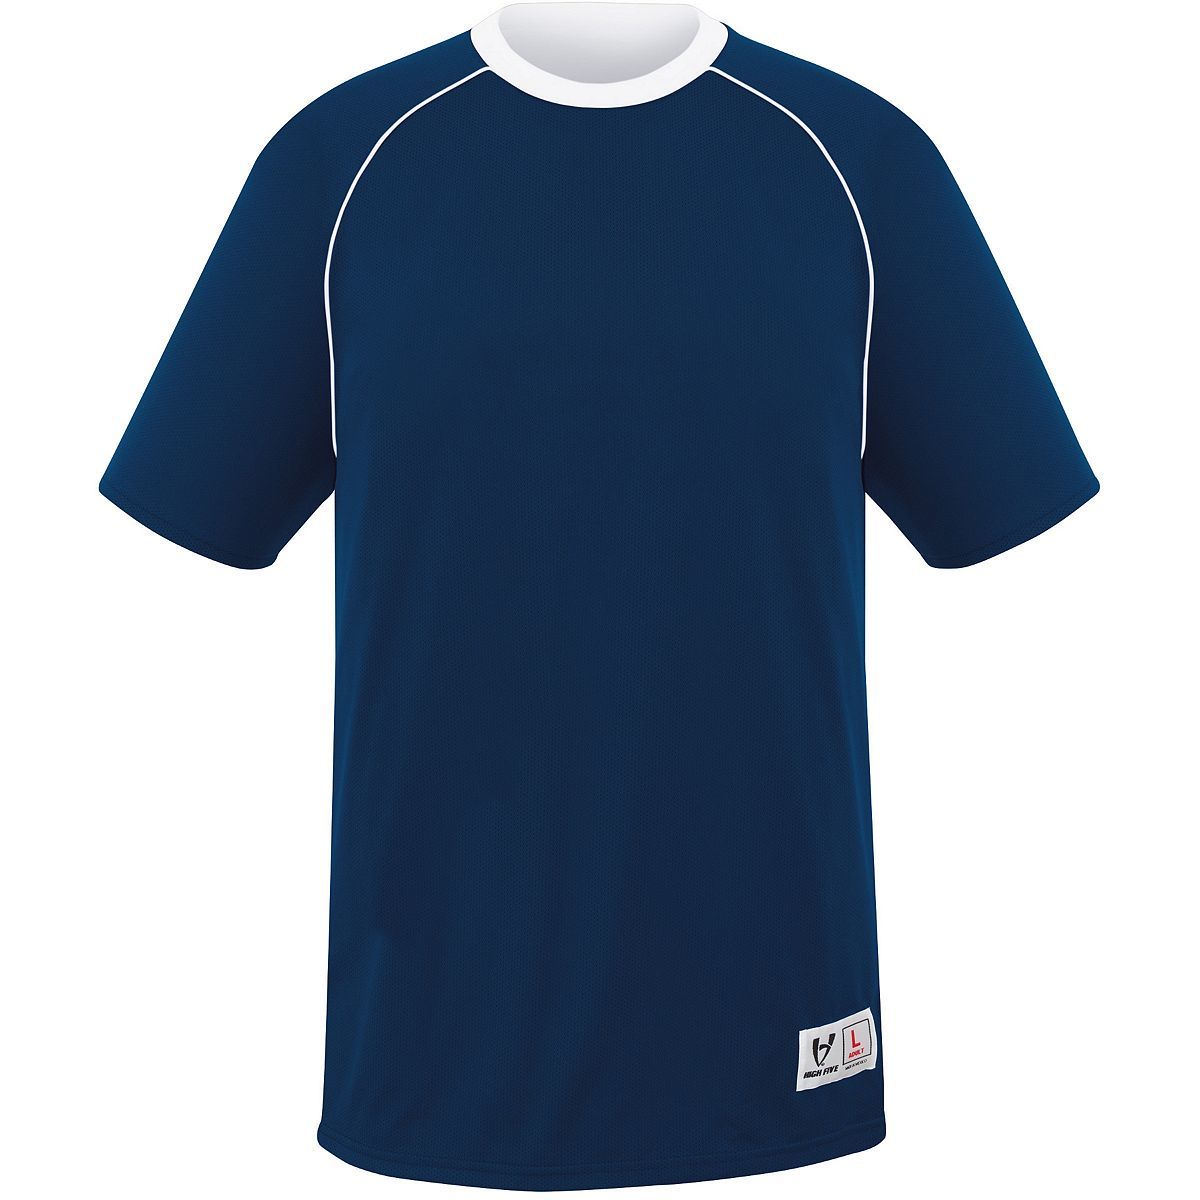 High 5 Youth Conversion Reversible Jersey in Navy/White  -Part of the Youth, Youth-Jersey, High5-Products, Soccer, Shirts, All-Sports-1 product lines at KanaleyCreations.com